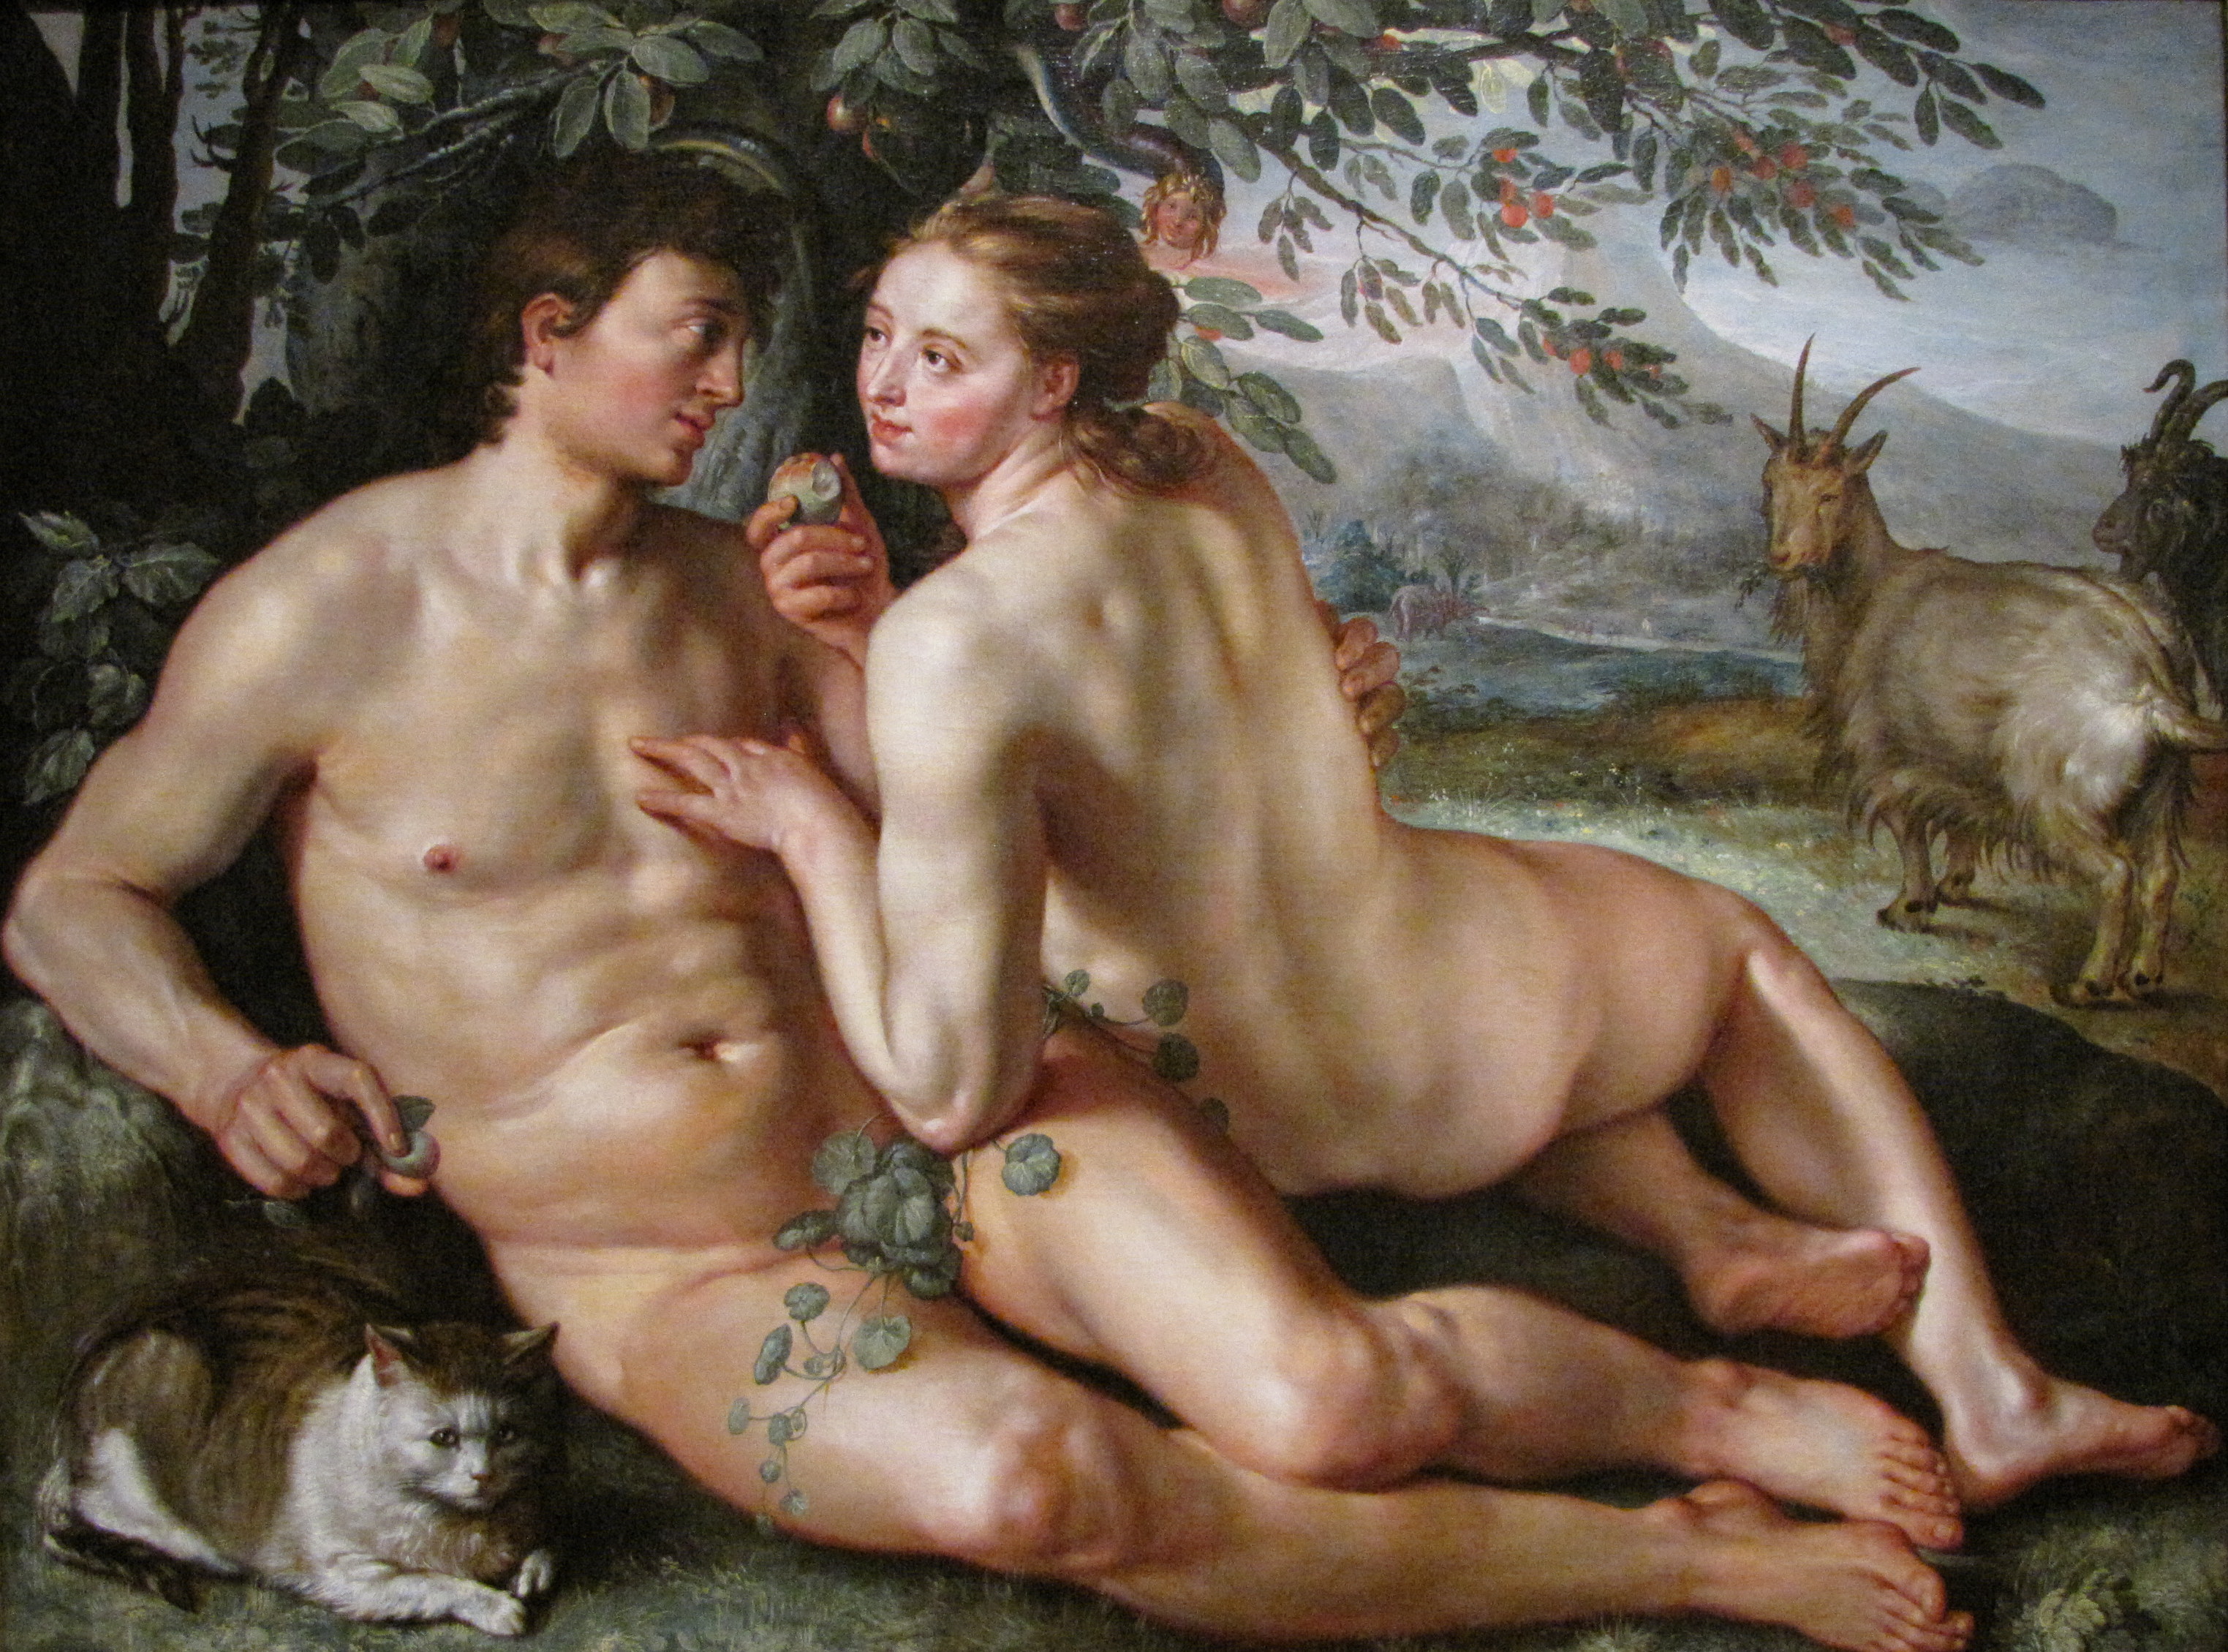 Henrik Goltzius: The Fall of Man, 1616 photo by euthman on Flickr